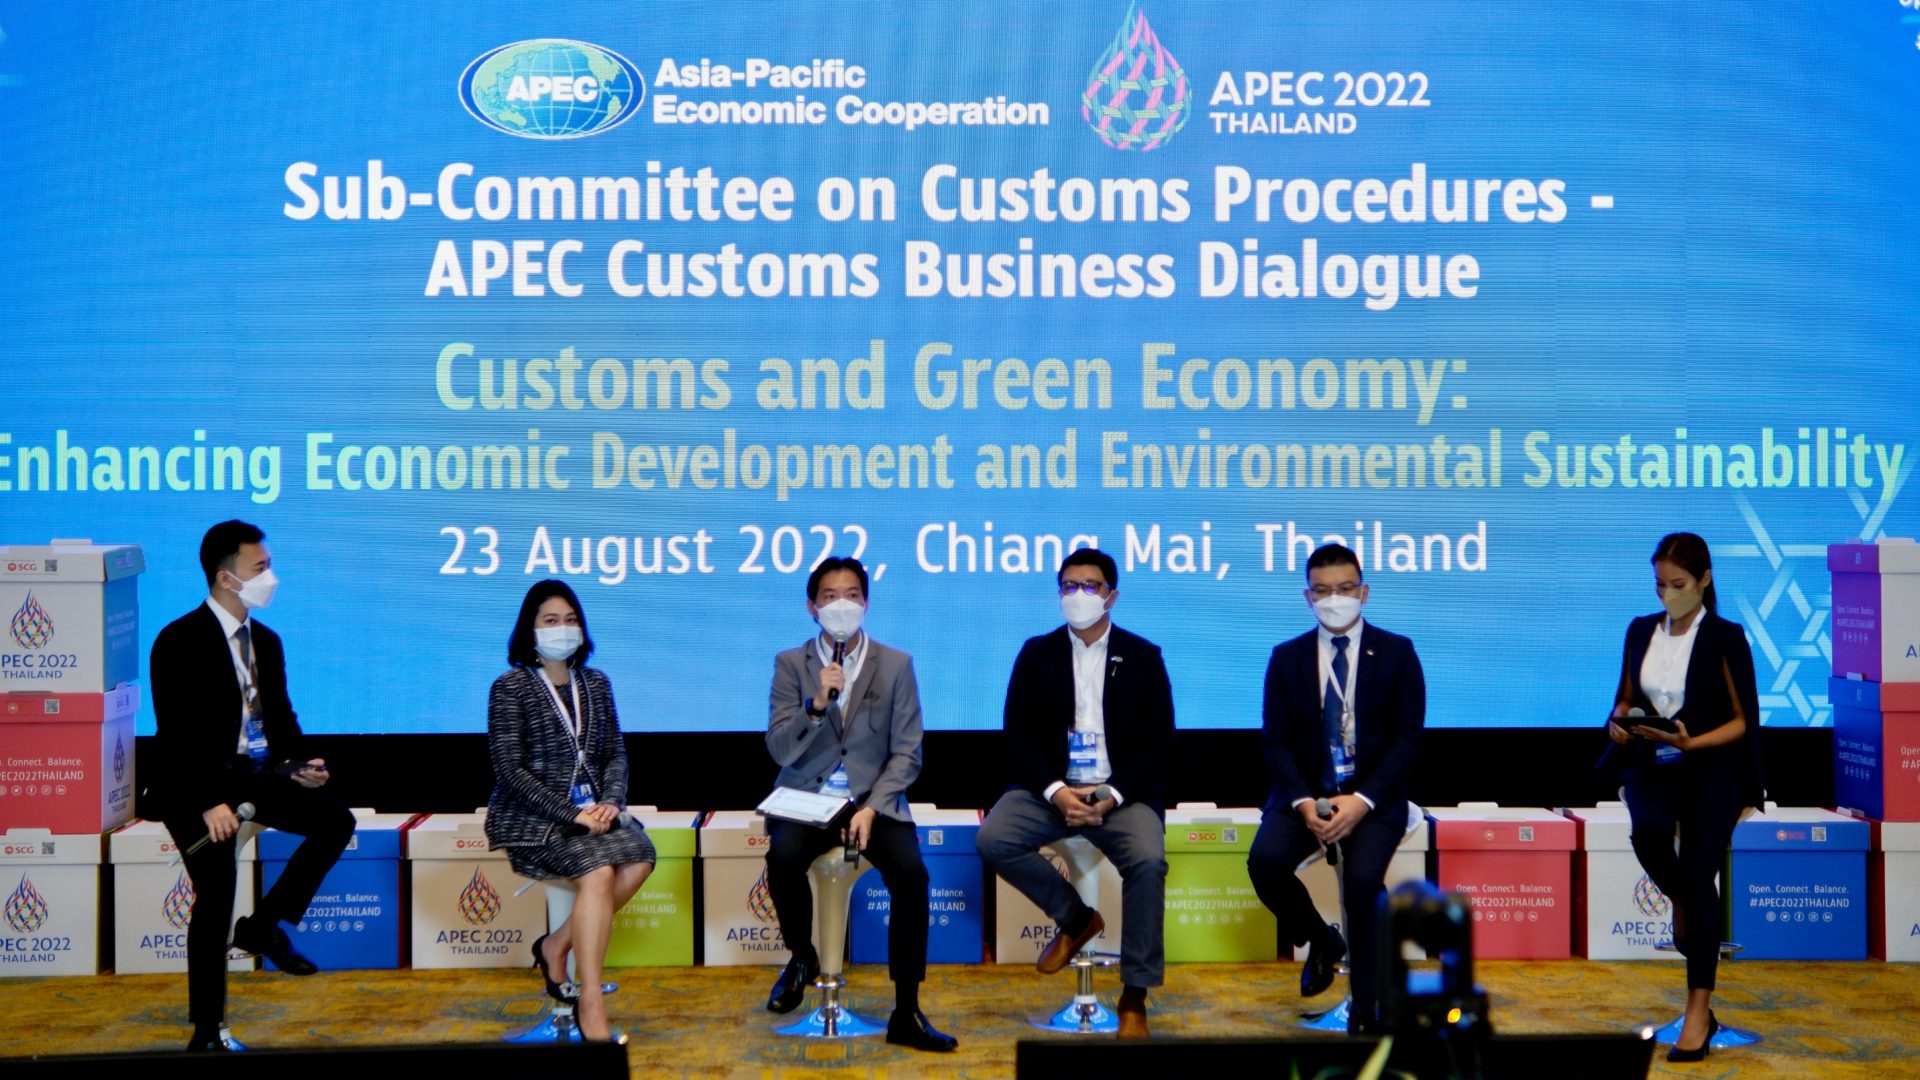 INSEE Ecocycle took part as a panel speaker and exhibitor in the APEC Customs Business Dialogue (ACBD) 2022